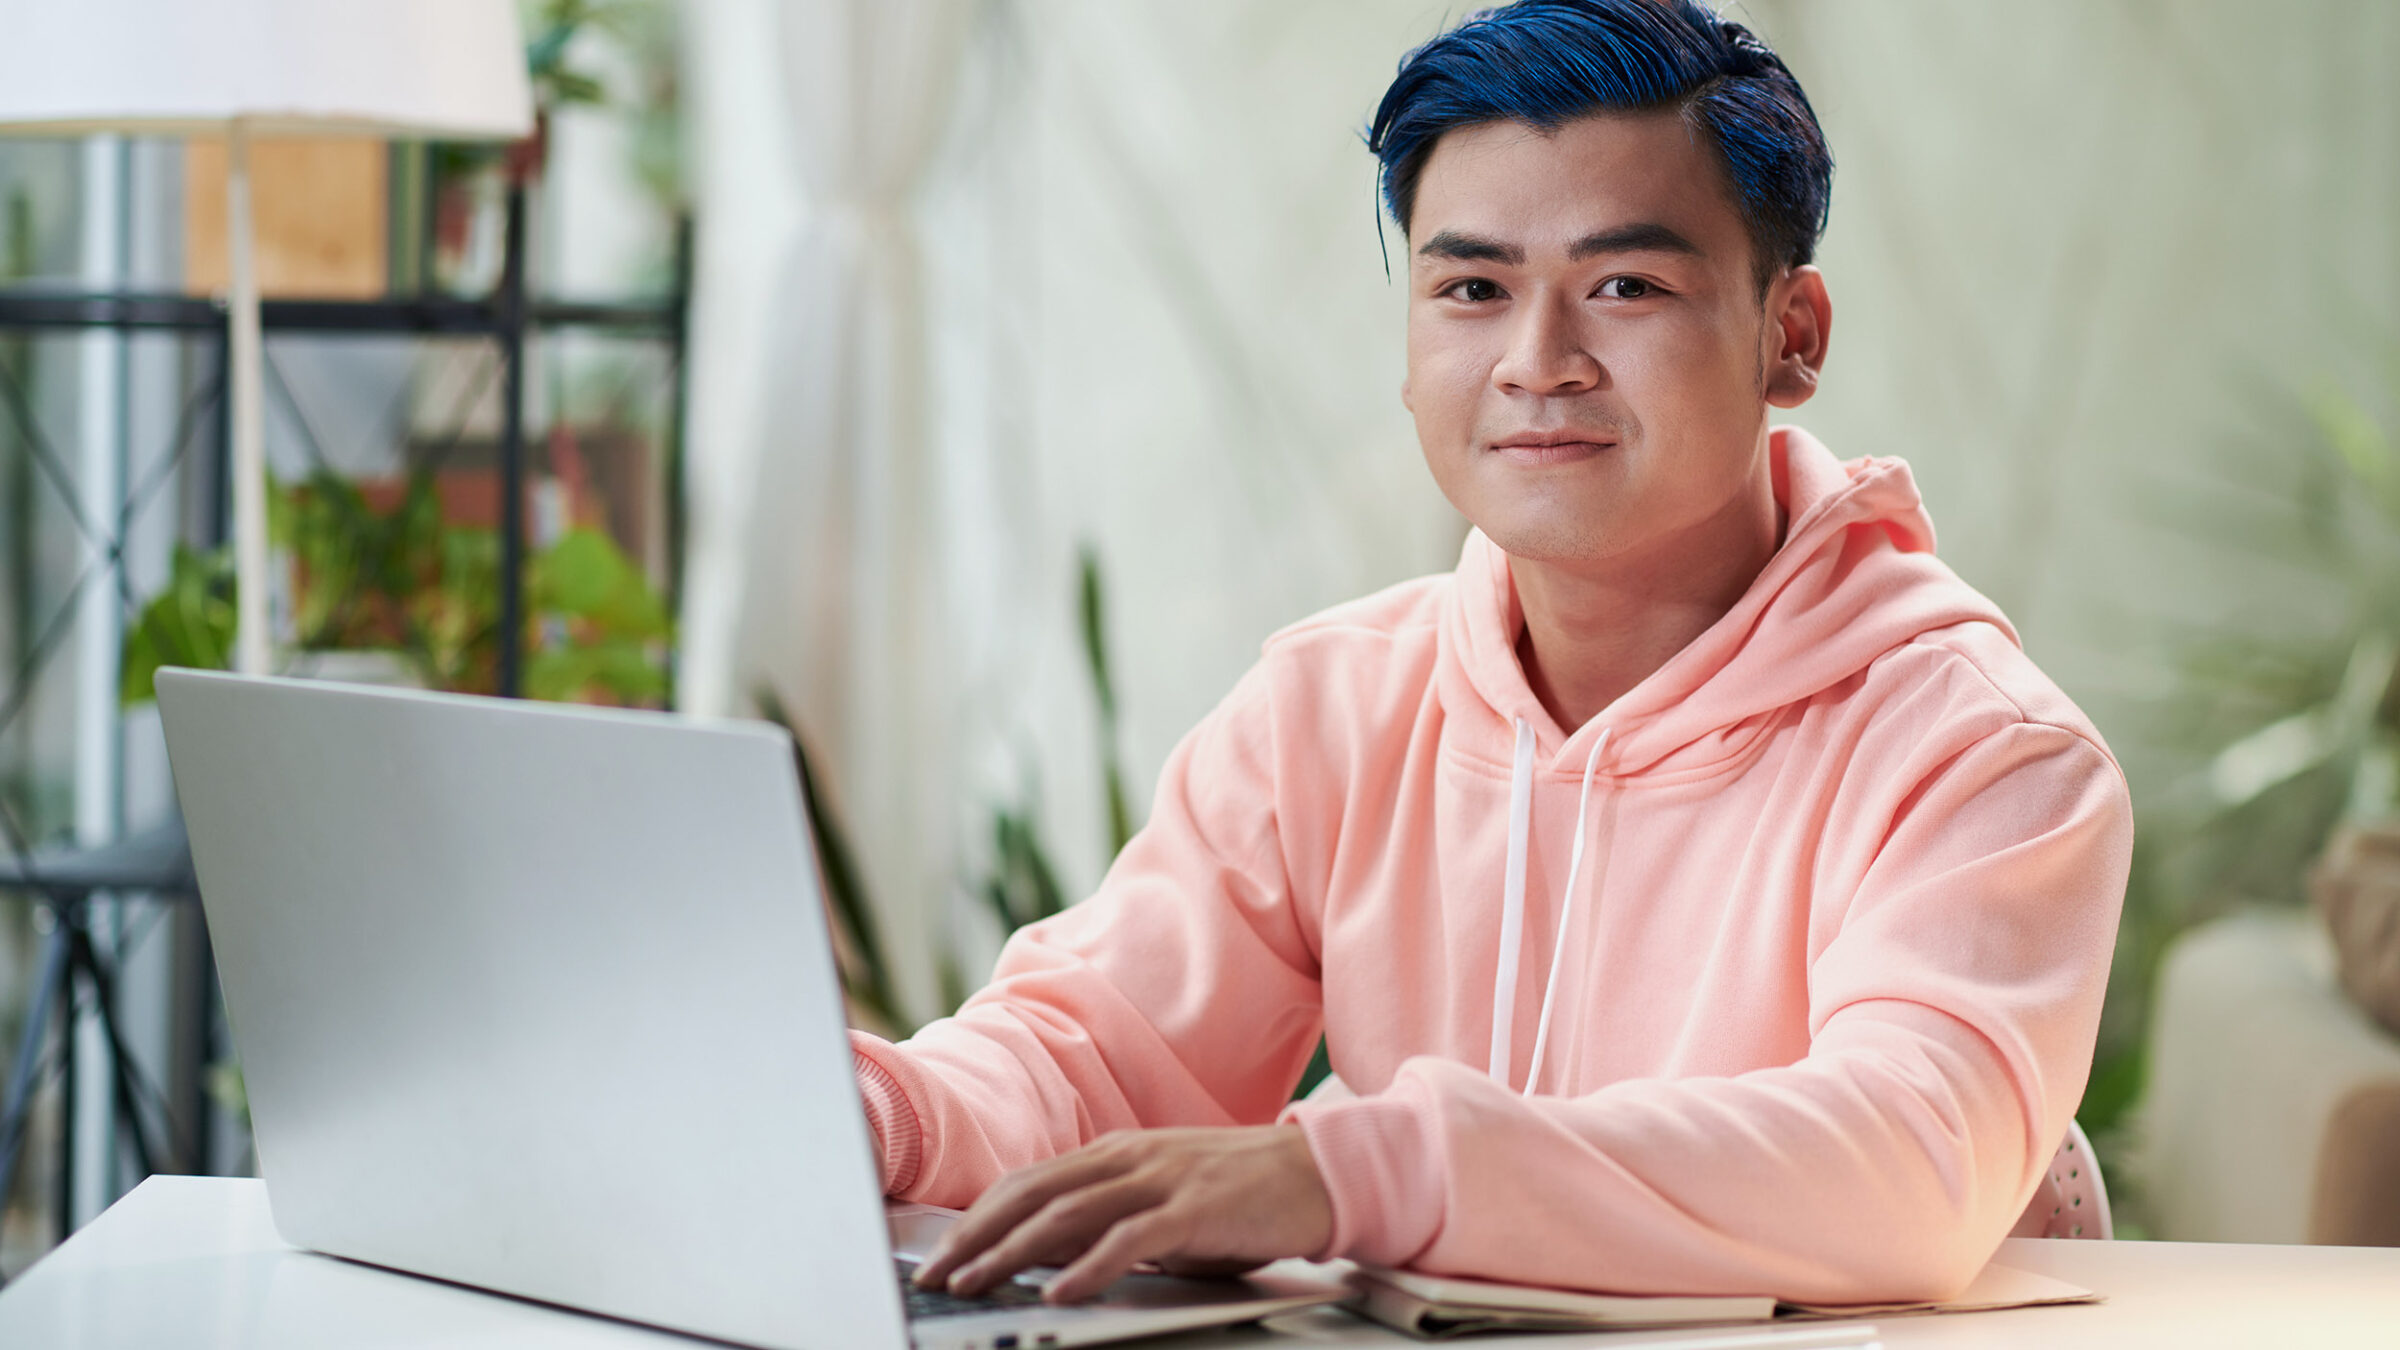 young man with blue hair is using a laptop